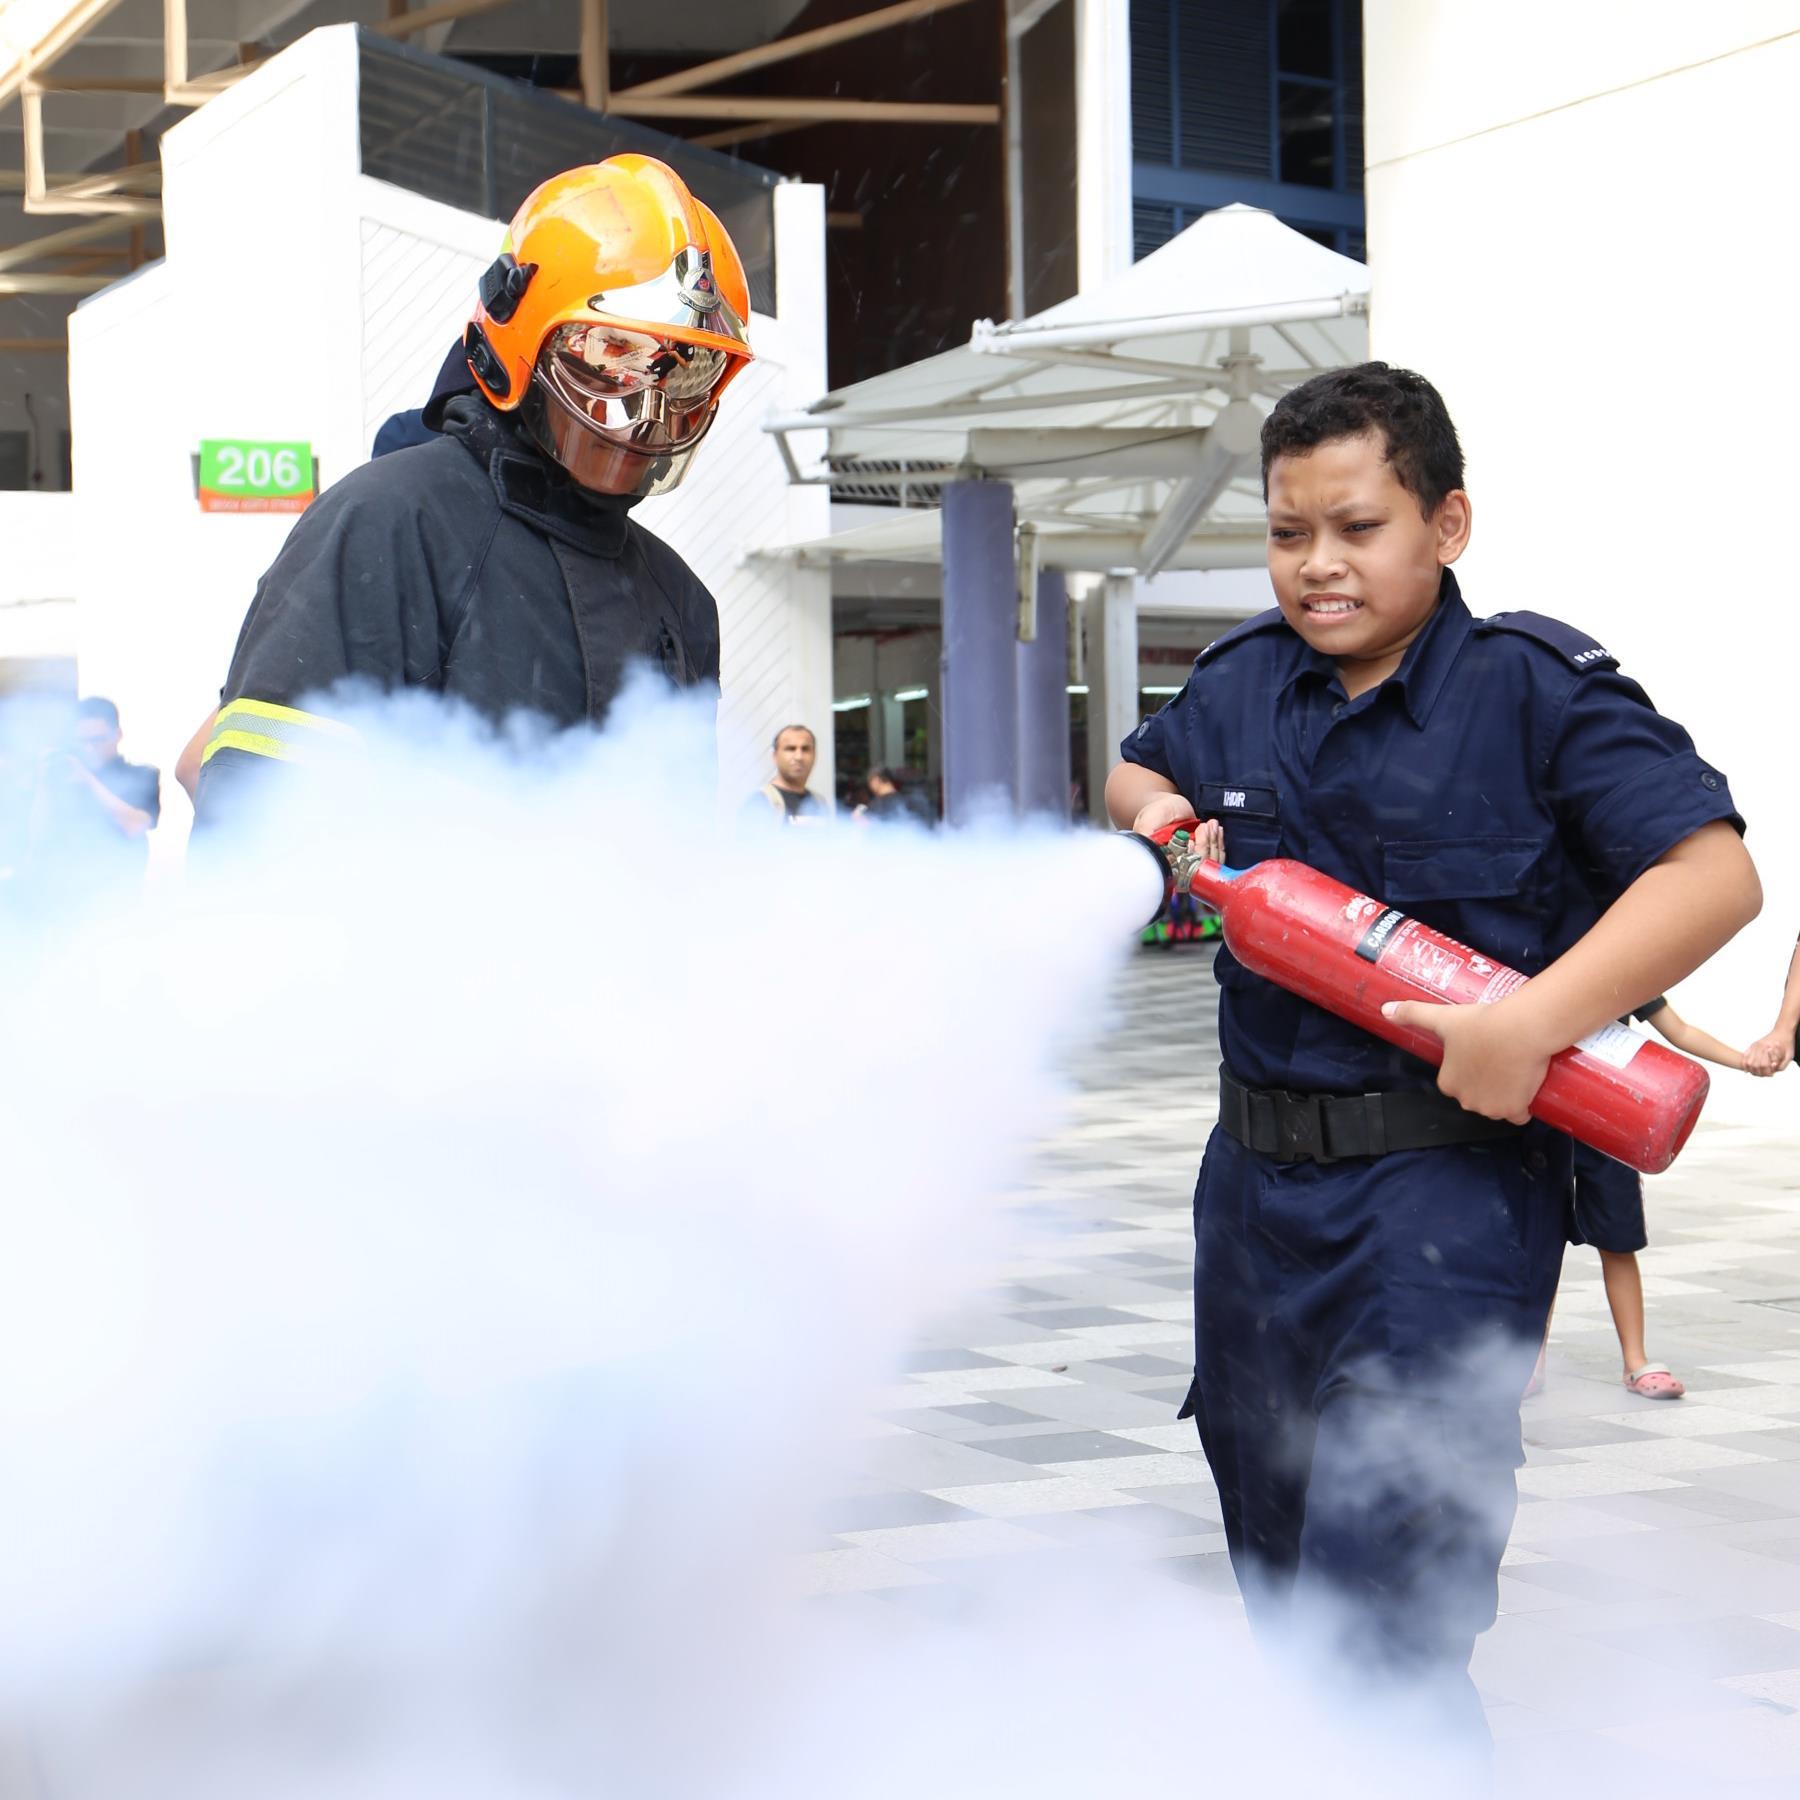 Khidir learning how to use a fire extinguisher